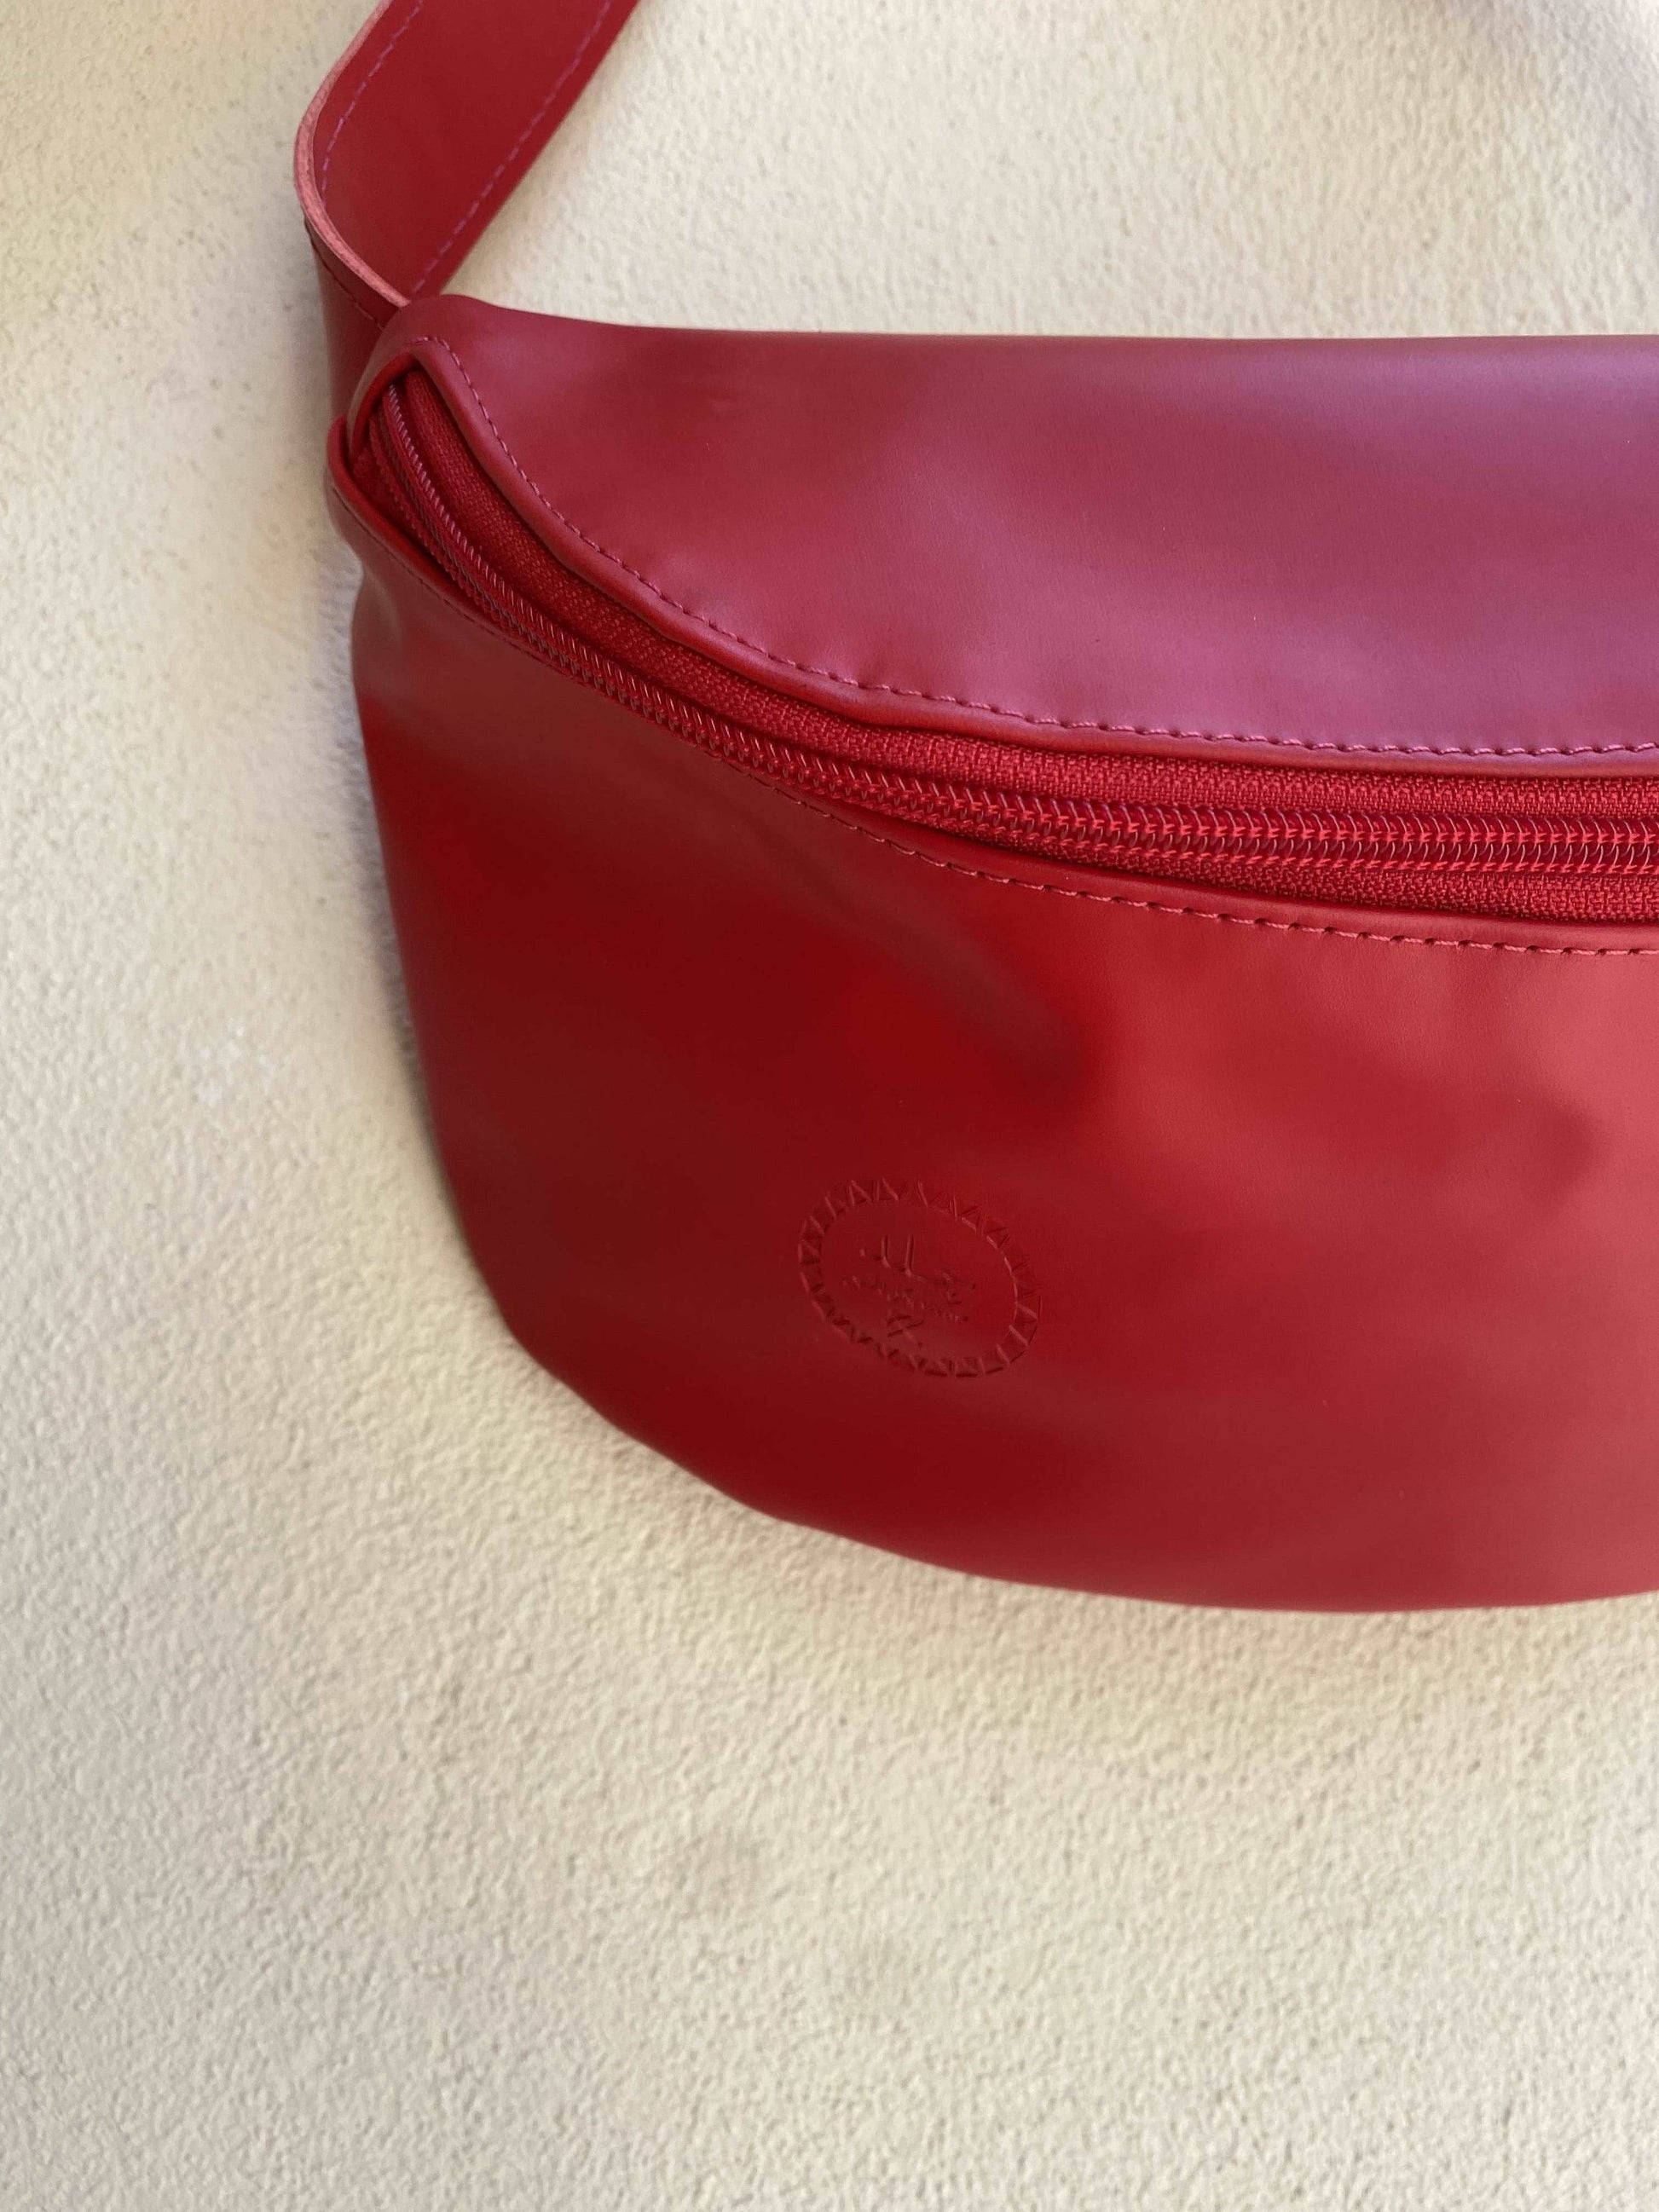 leather-fanny-pack-bag